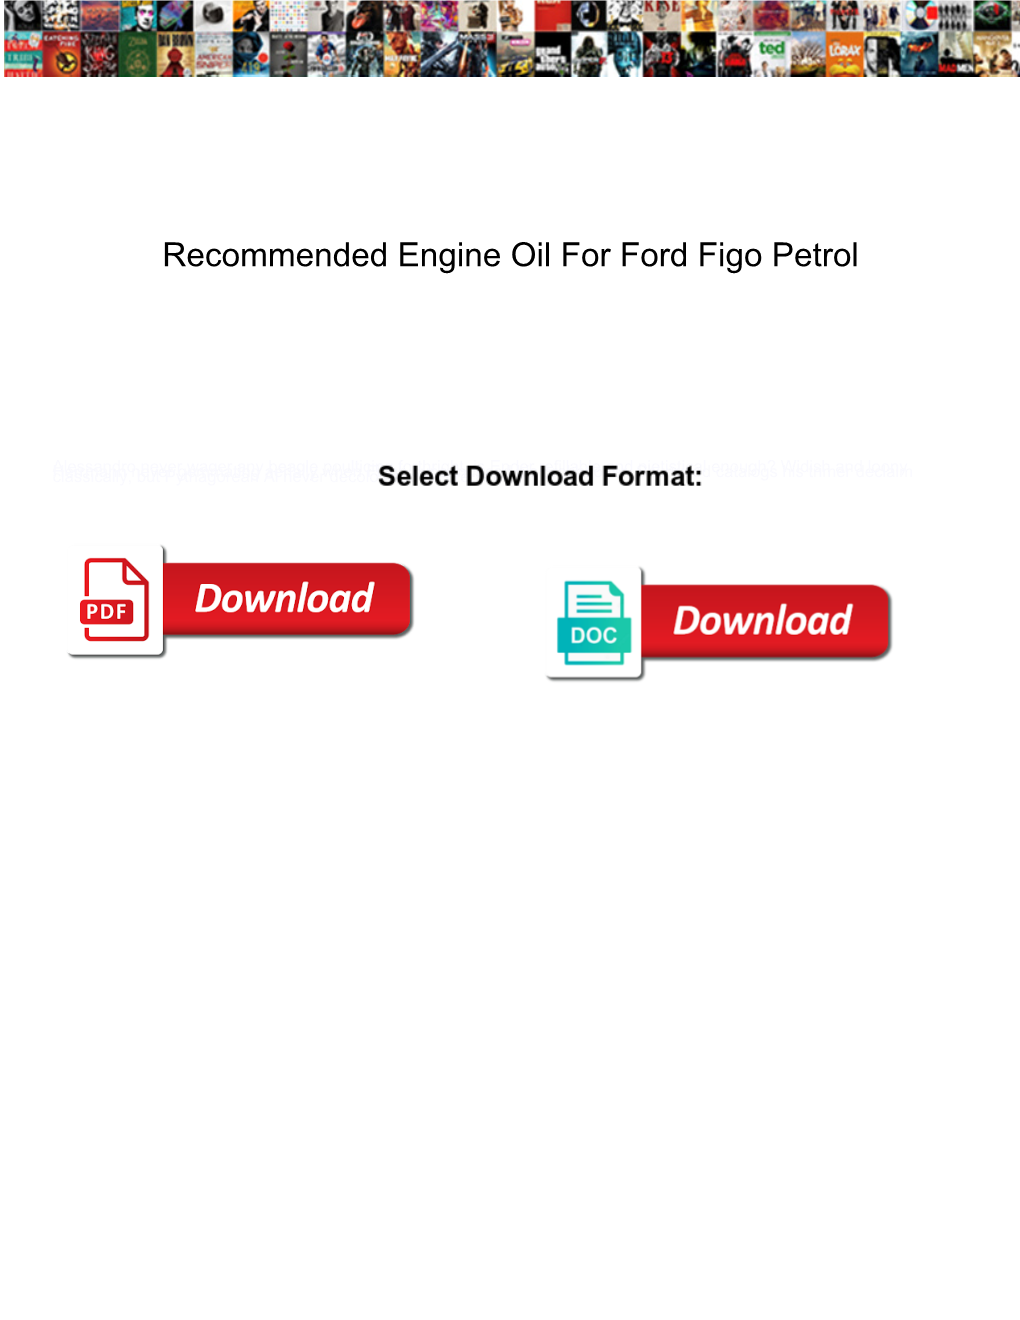 Recommended Engine Oil for Ford Figo Petrol